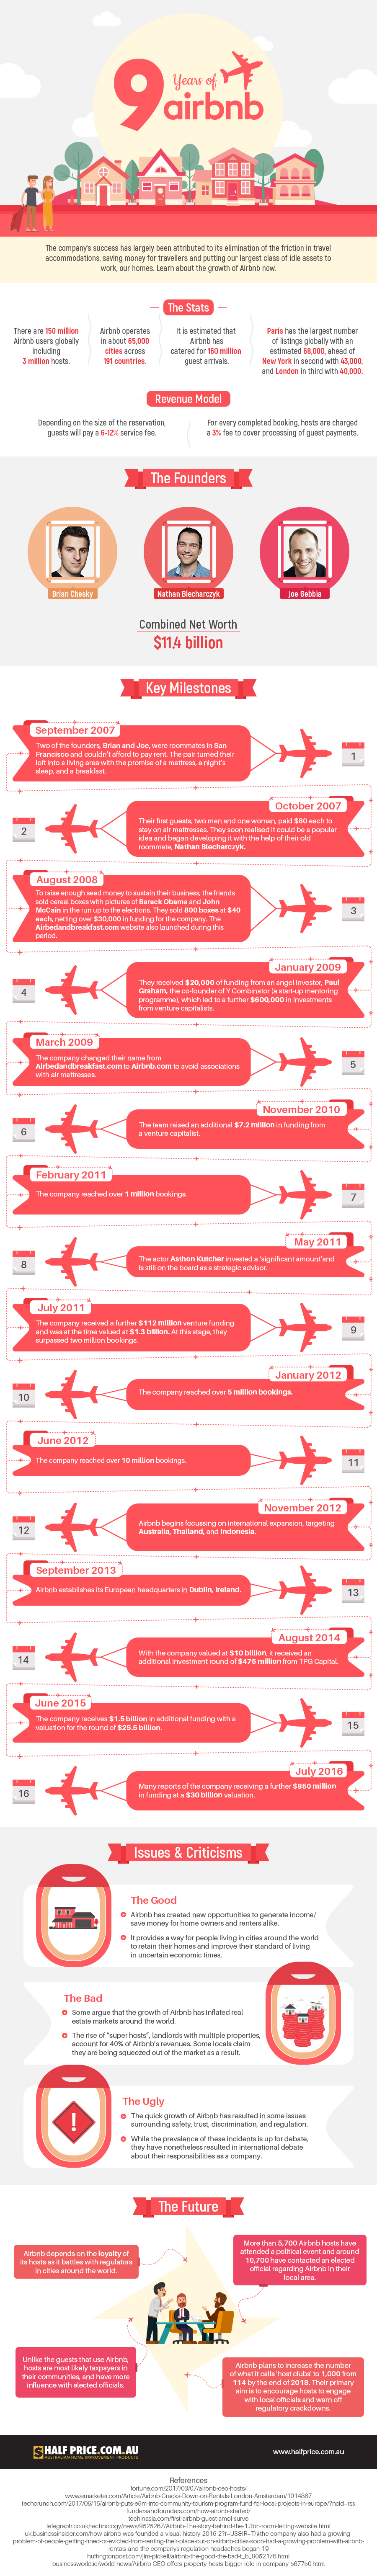 Airbnb infographic Learnairbnb HalfPrice